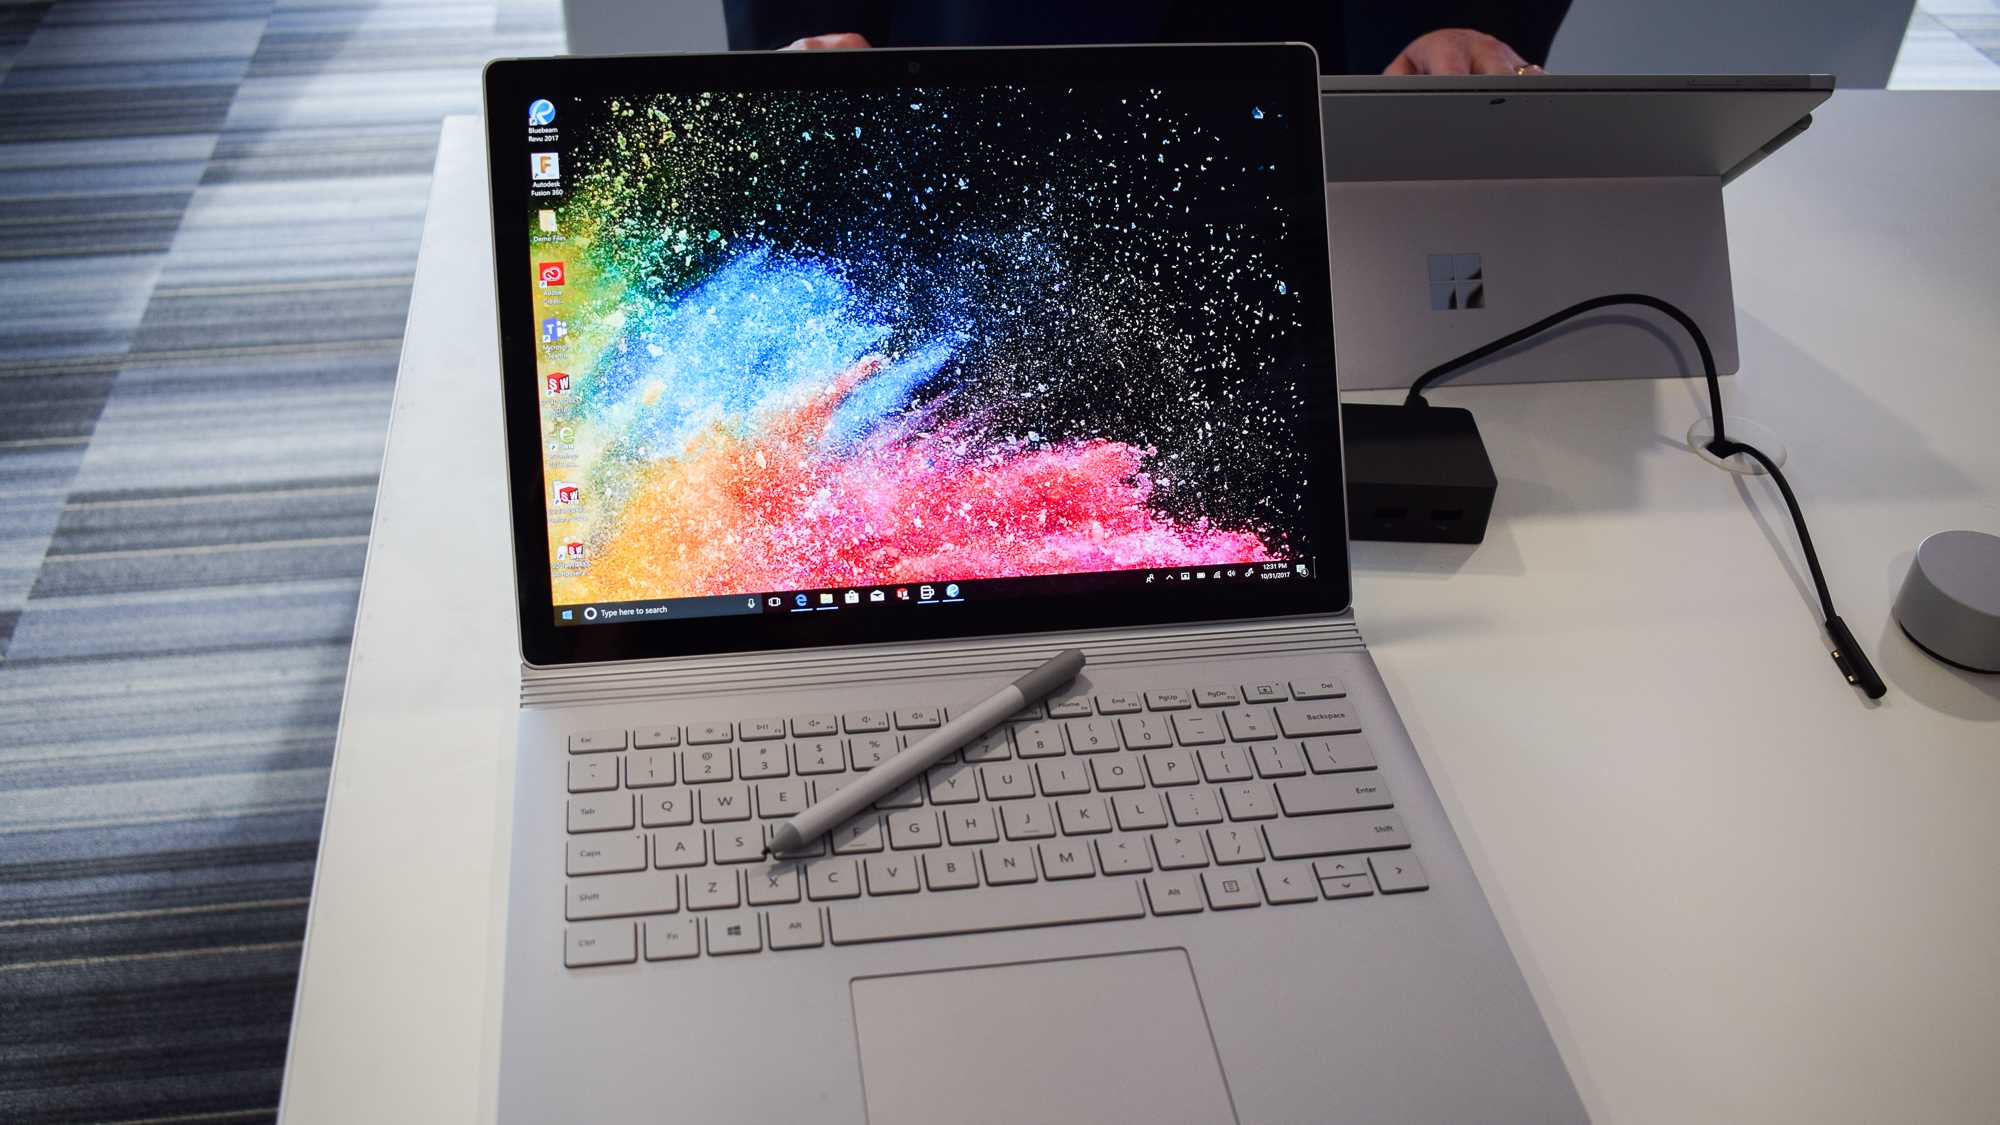 Microsoft surface book 2 (15-inch) review